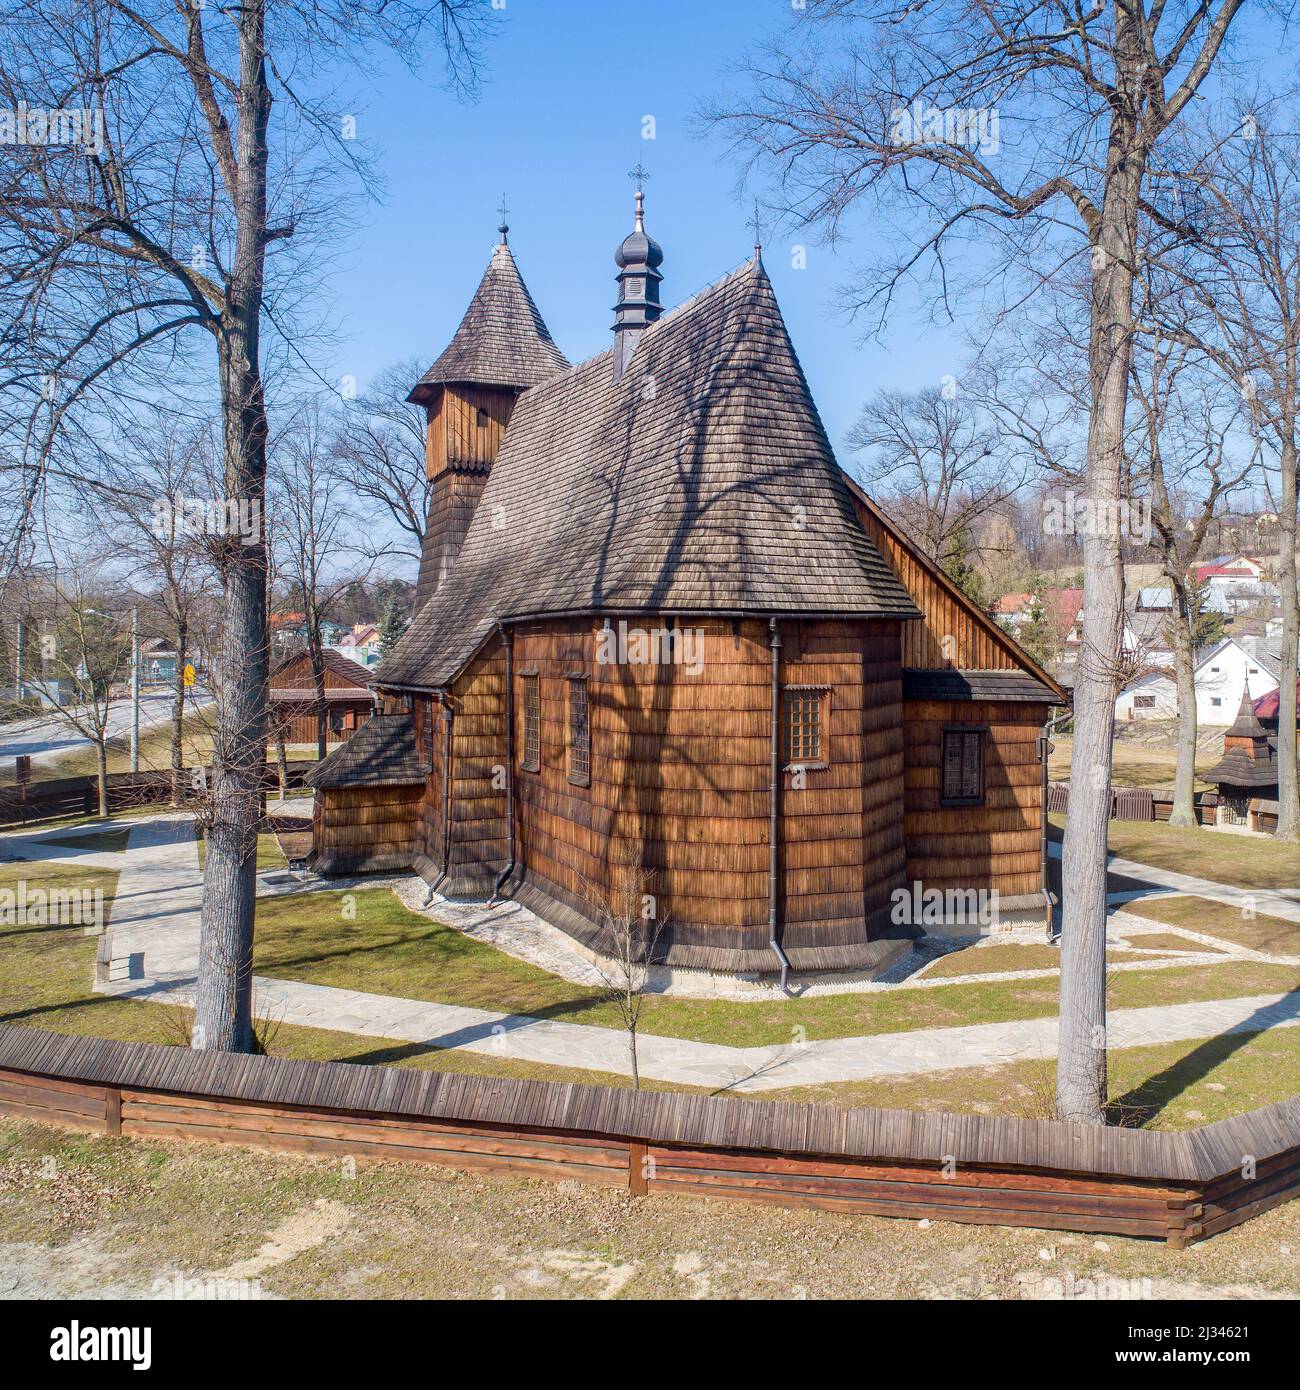 The Gothic wooden church of the Archangel Michael in Binarowa in Lesser Poland. Built in early 16th century (about 1500). UNESCO World Heritage Site. Stock Photo